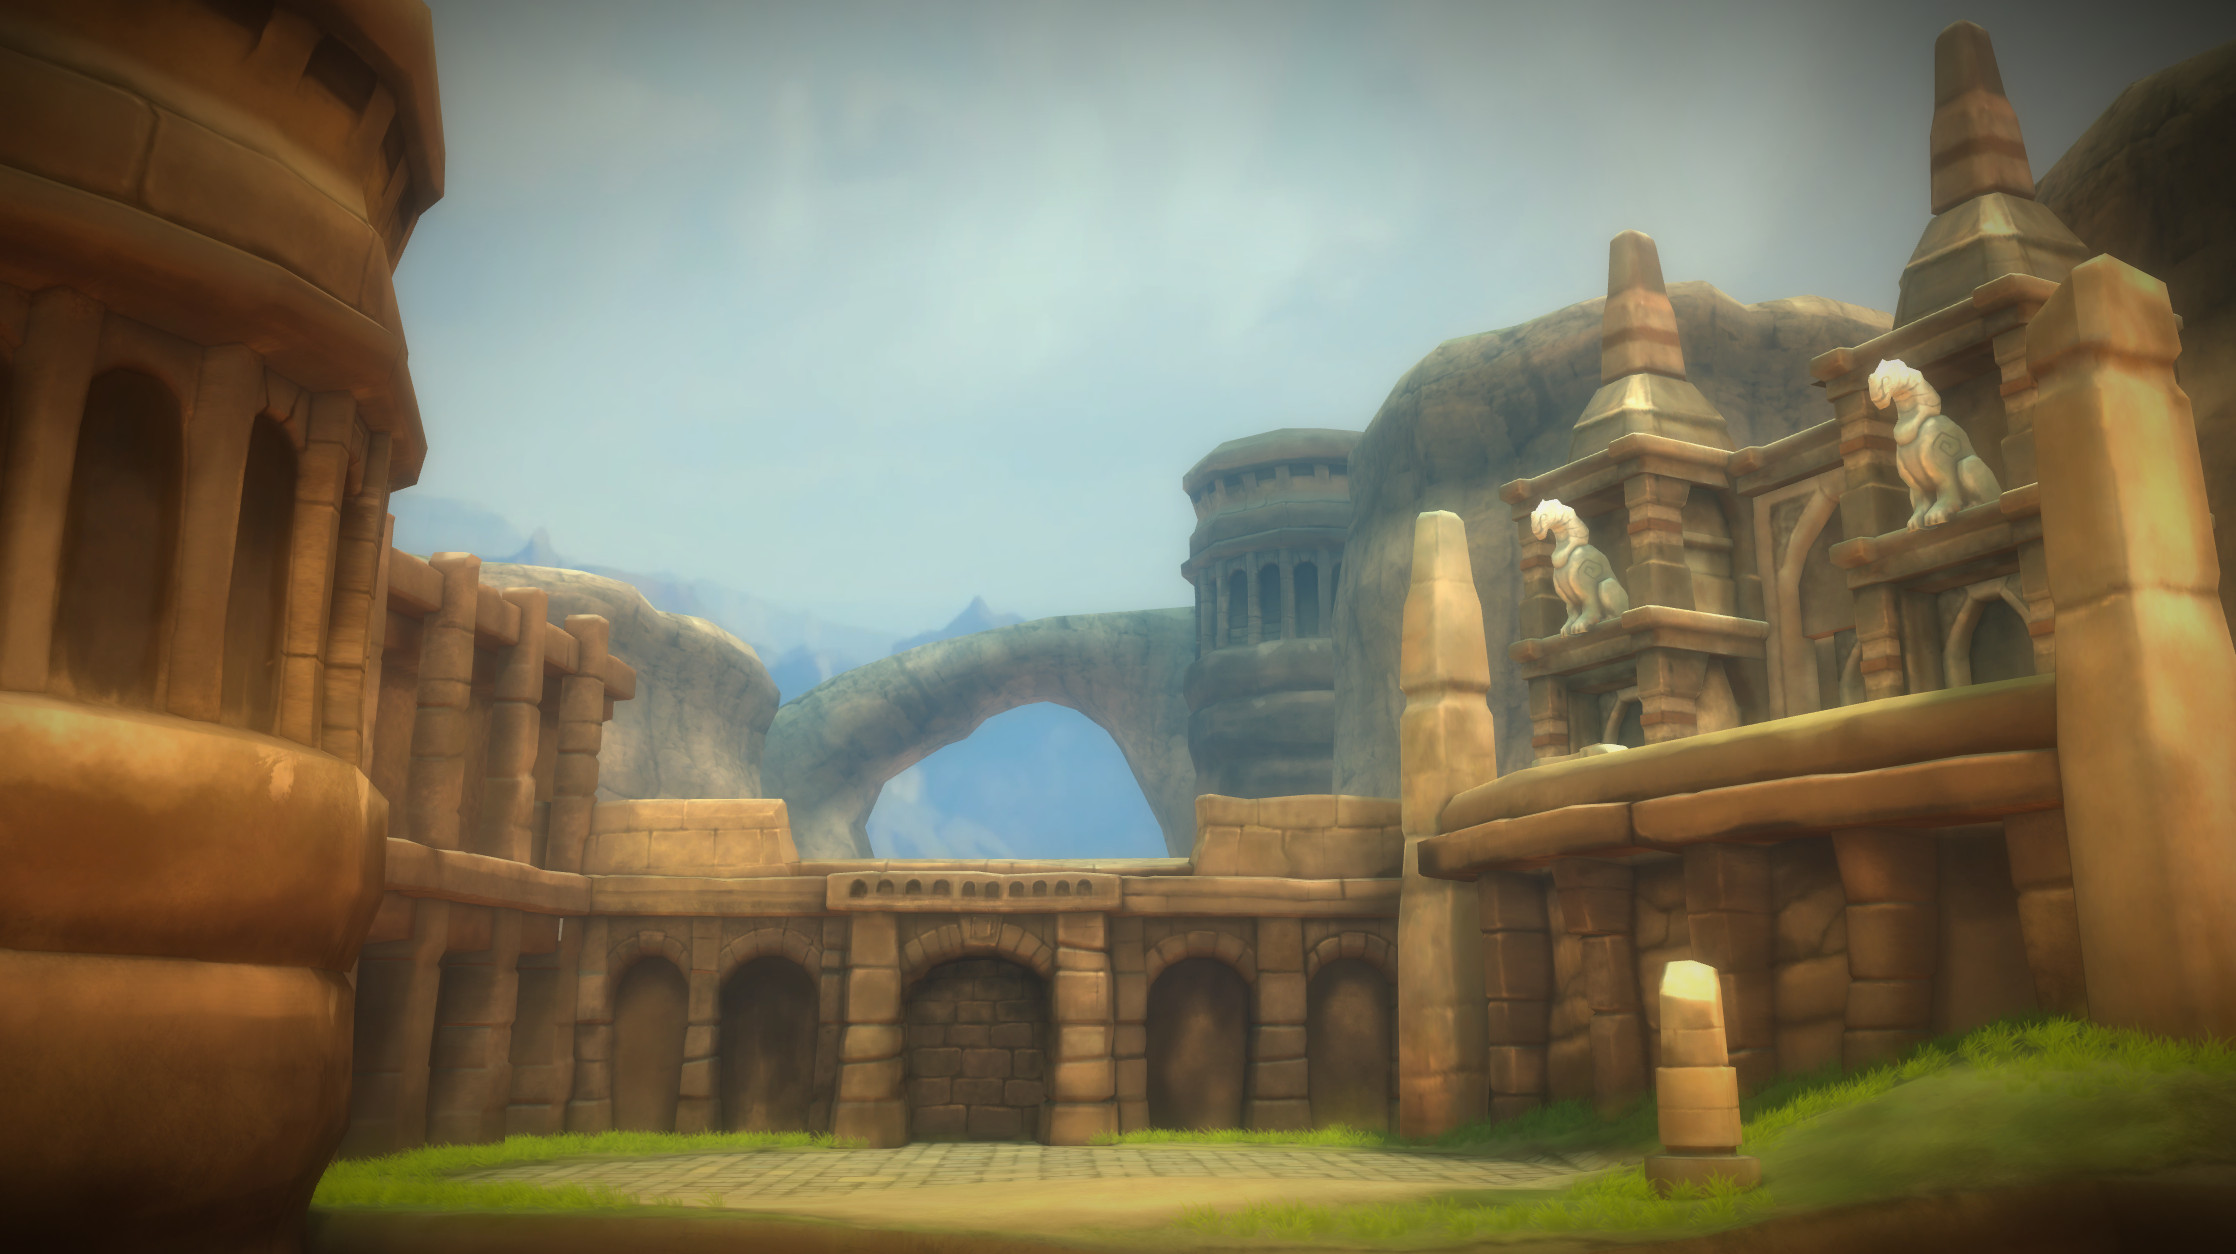 The first environment I did for Earthlock 